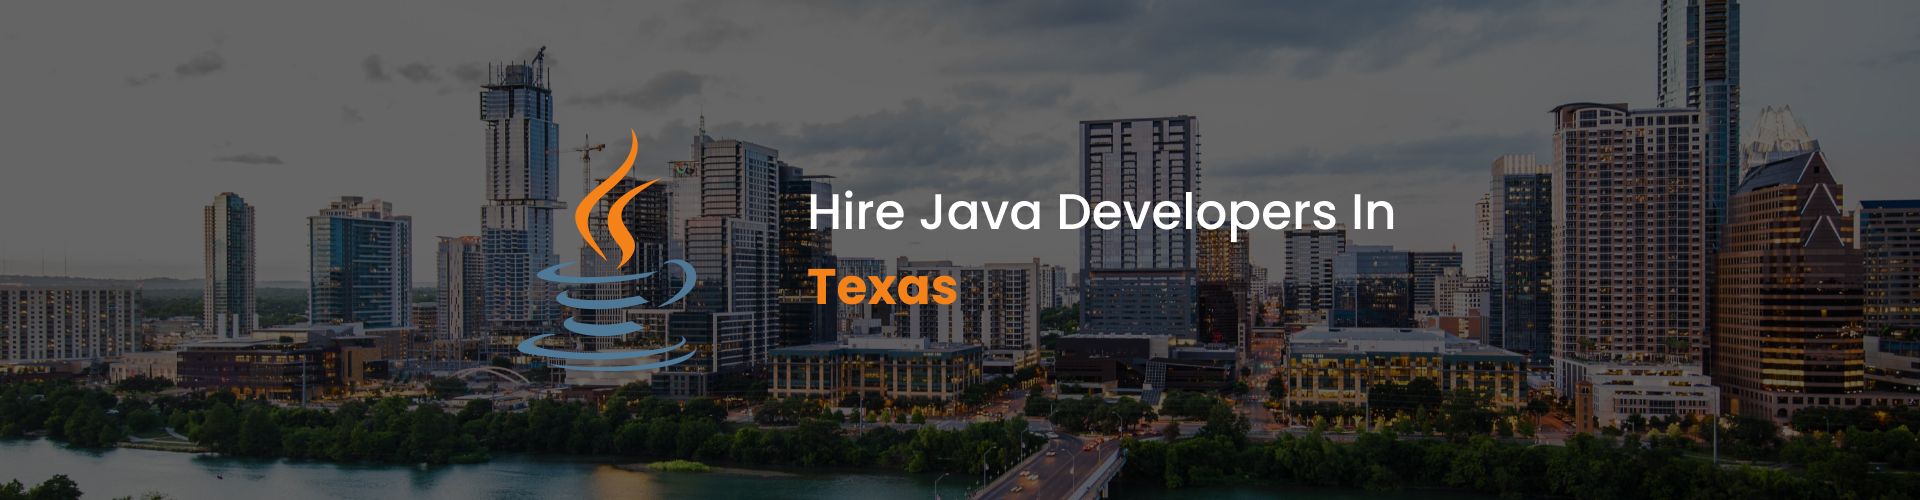 hire java developers in texas